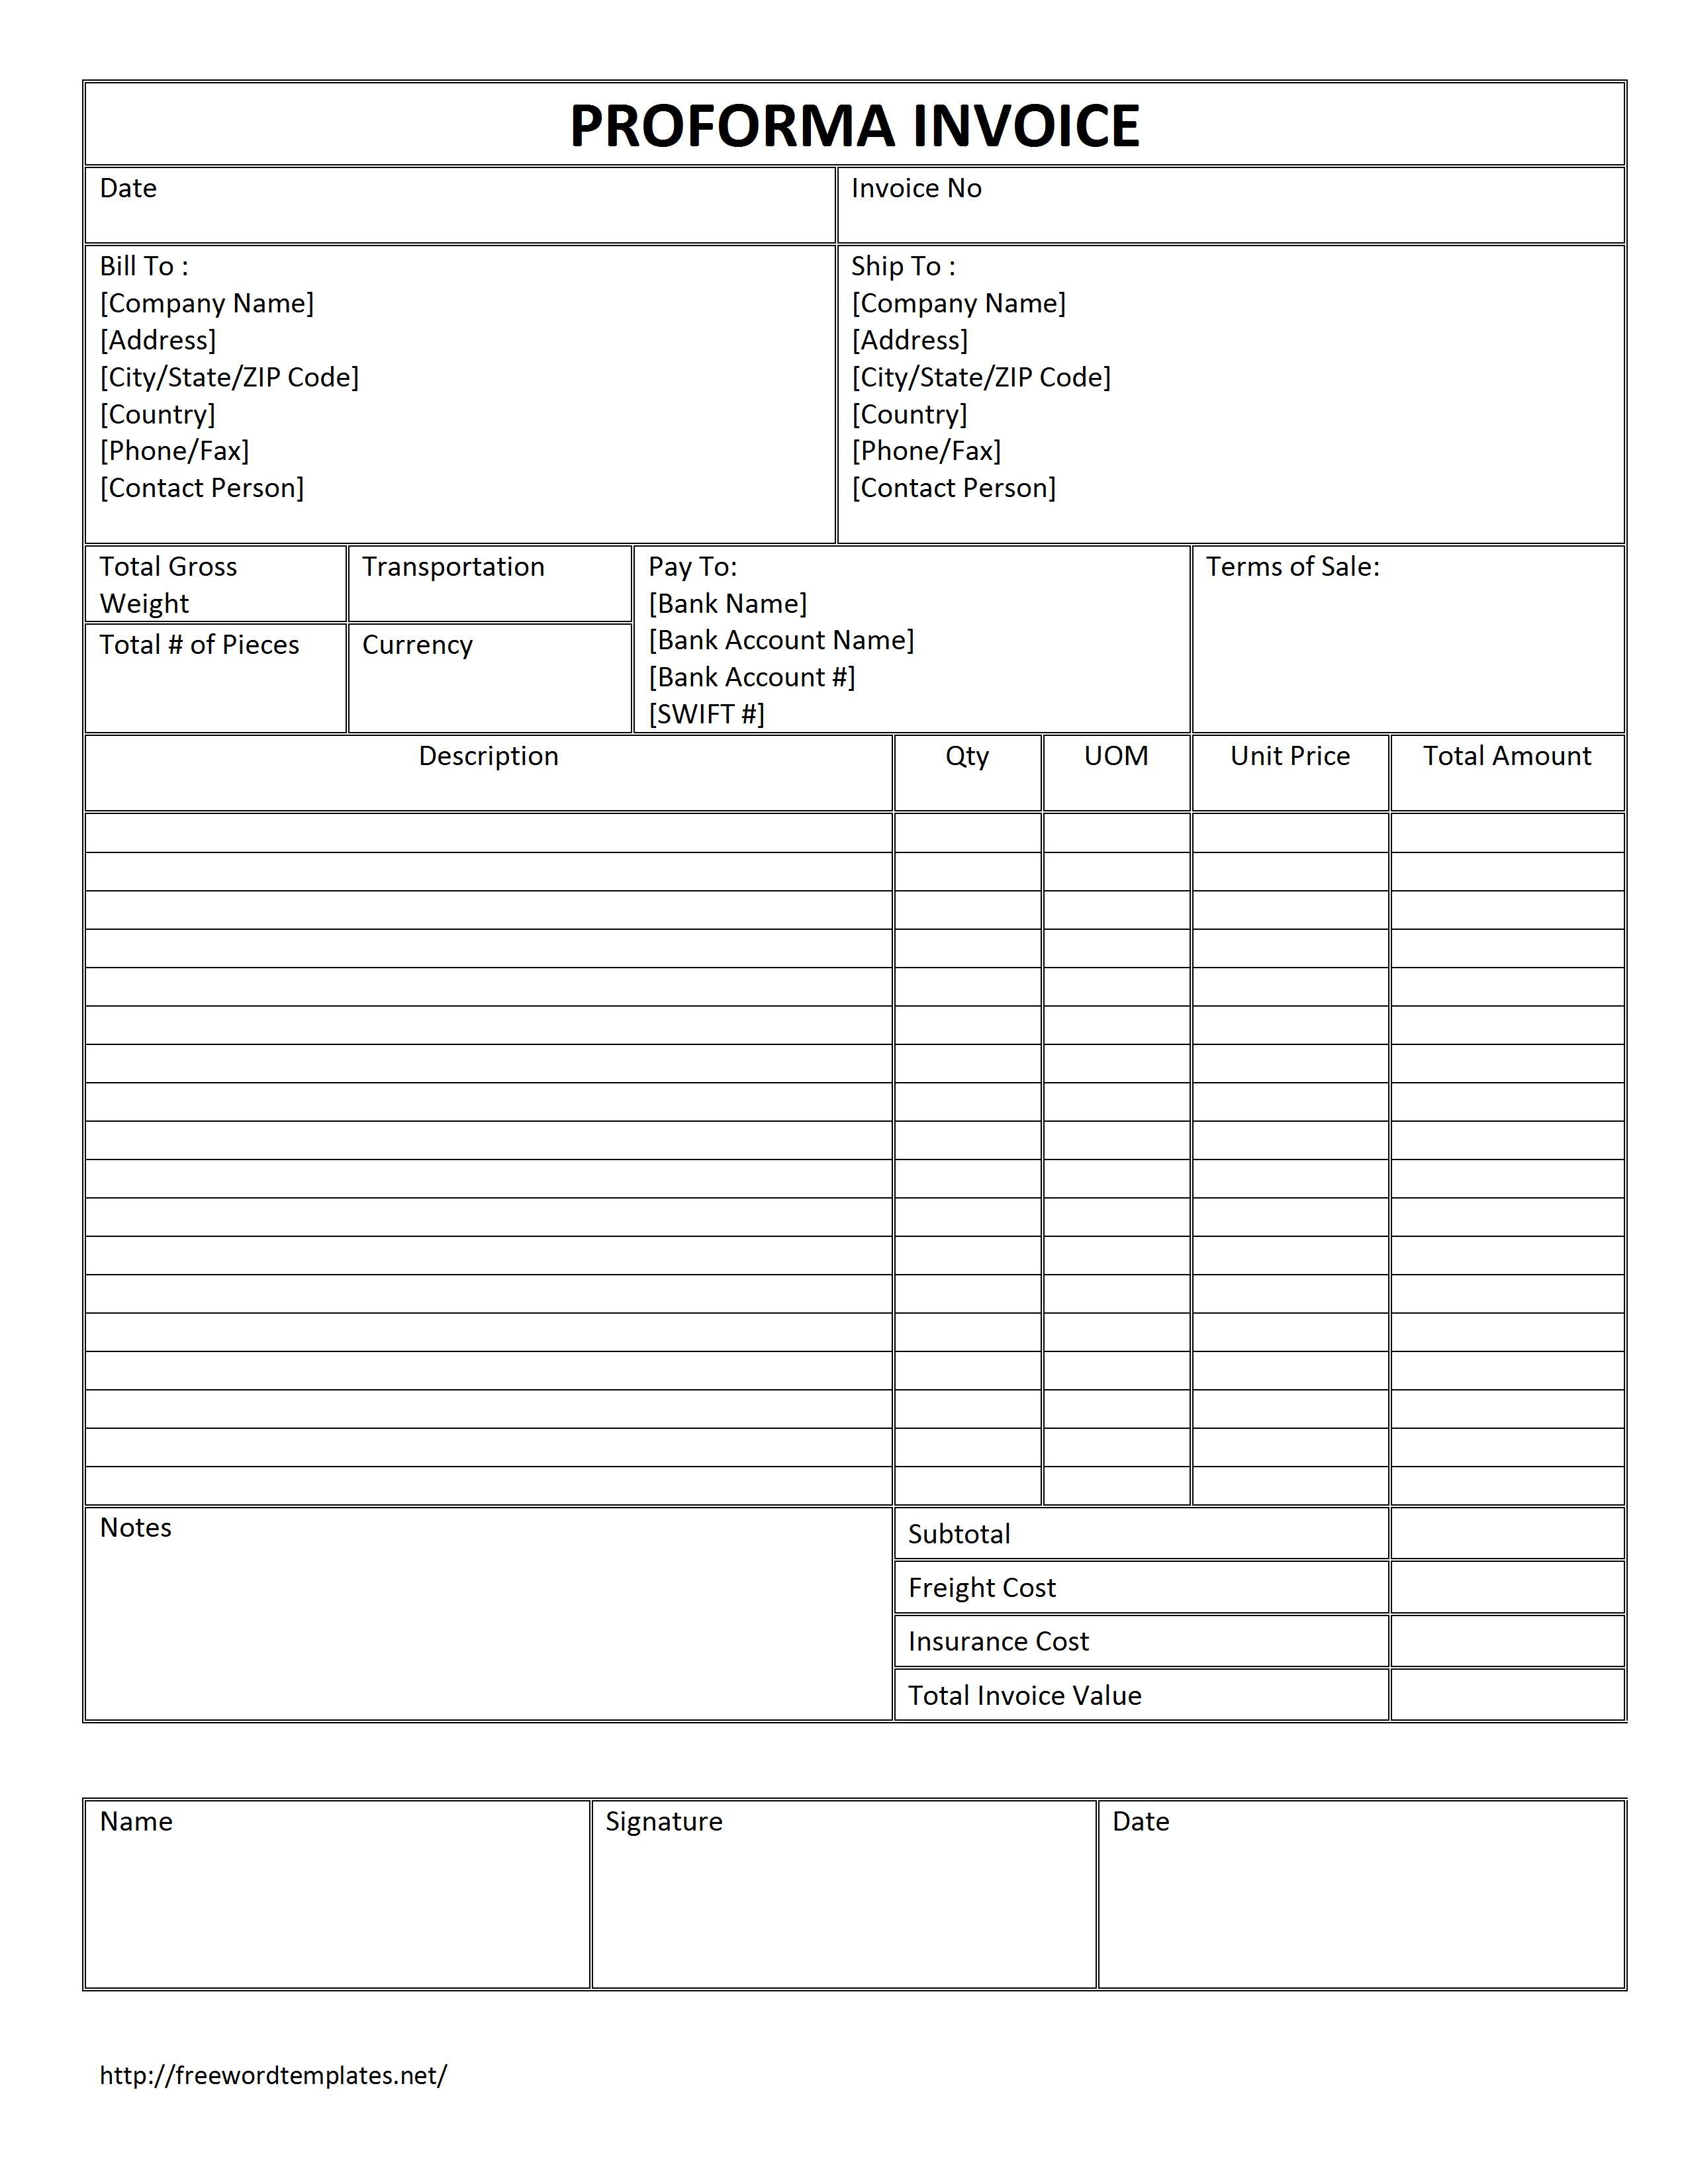 sample of a proforma invoice proforma invoice word templates free word templates ms word 2550 X 3300